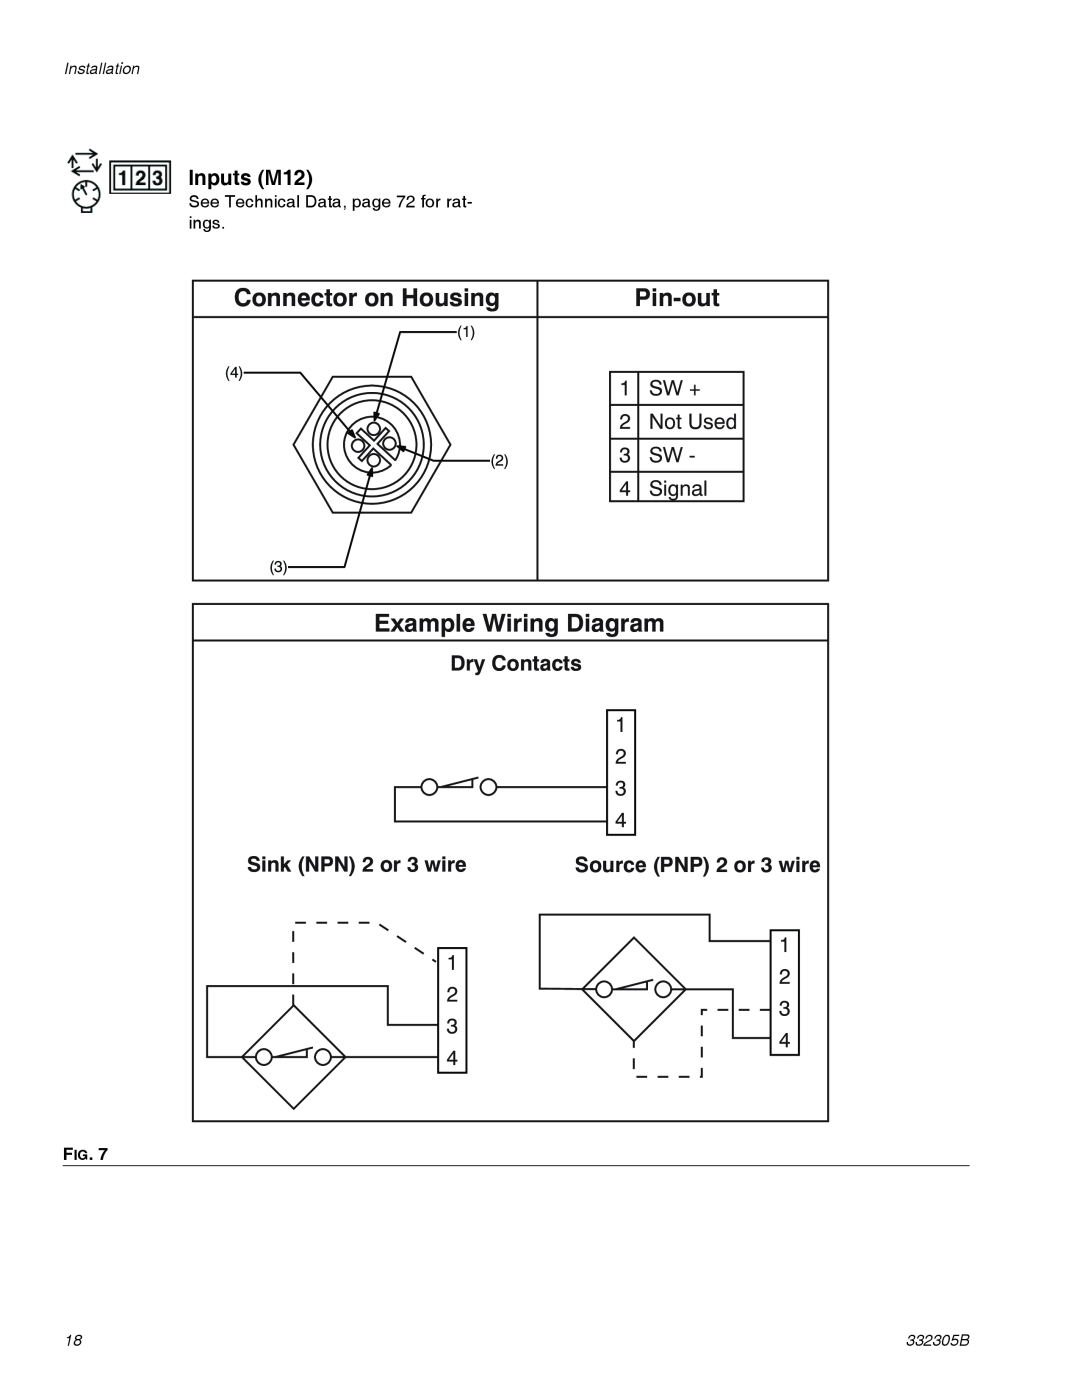 Graco 332305B Example Wiring Diagram, Inputs M12, Dry Contacts, Sink NPN 2 or 3 wire, Source PNP 2 or 3 wire, Pin-out 